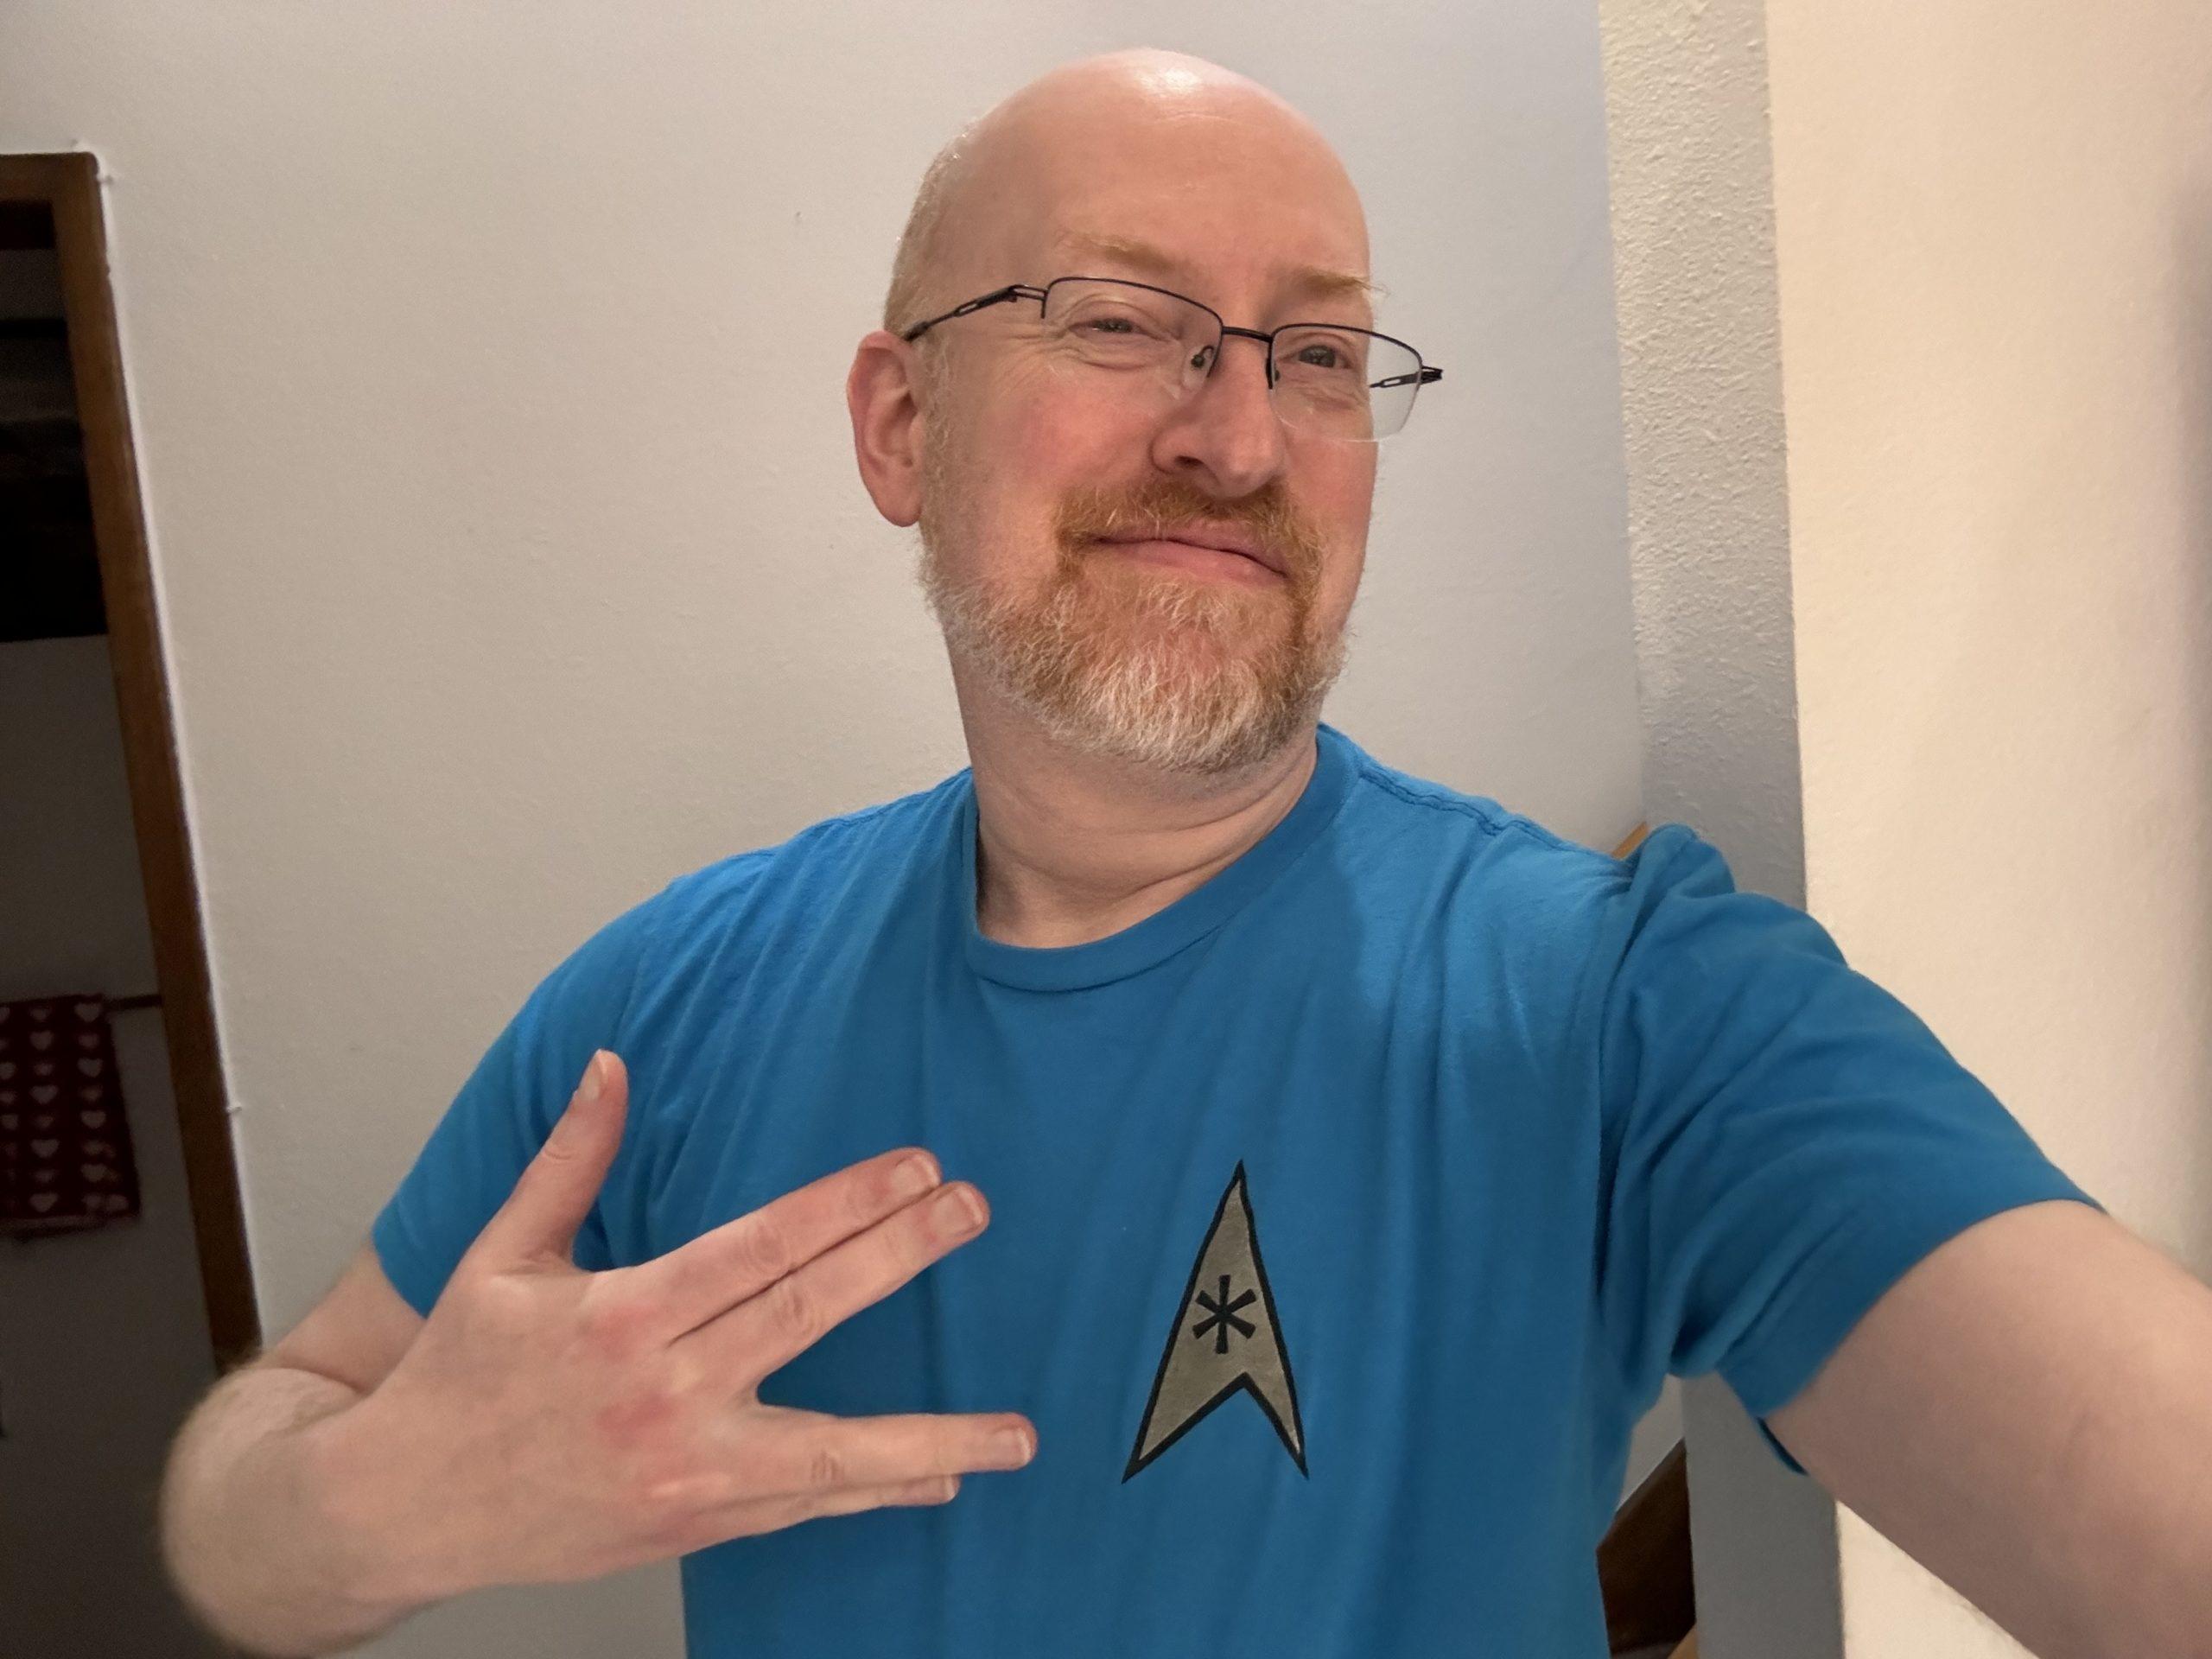 Me wearing a light blue t-shirt with a Star Tek delta shield with an asterisk. I'm making the Vulcan salute, only with my hand held sideways and with the back of my hand to the camera, and I'm kind of smirking.